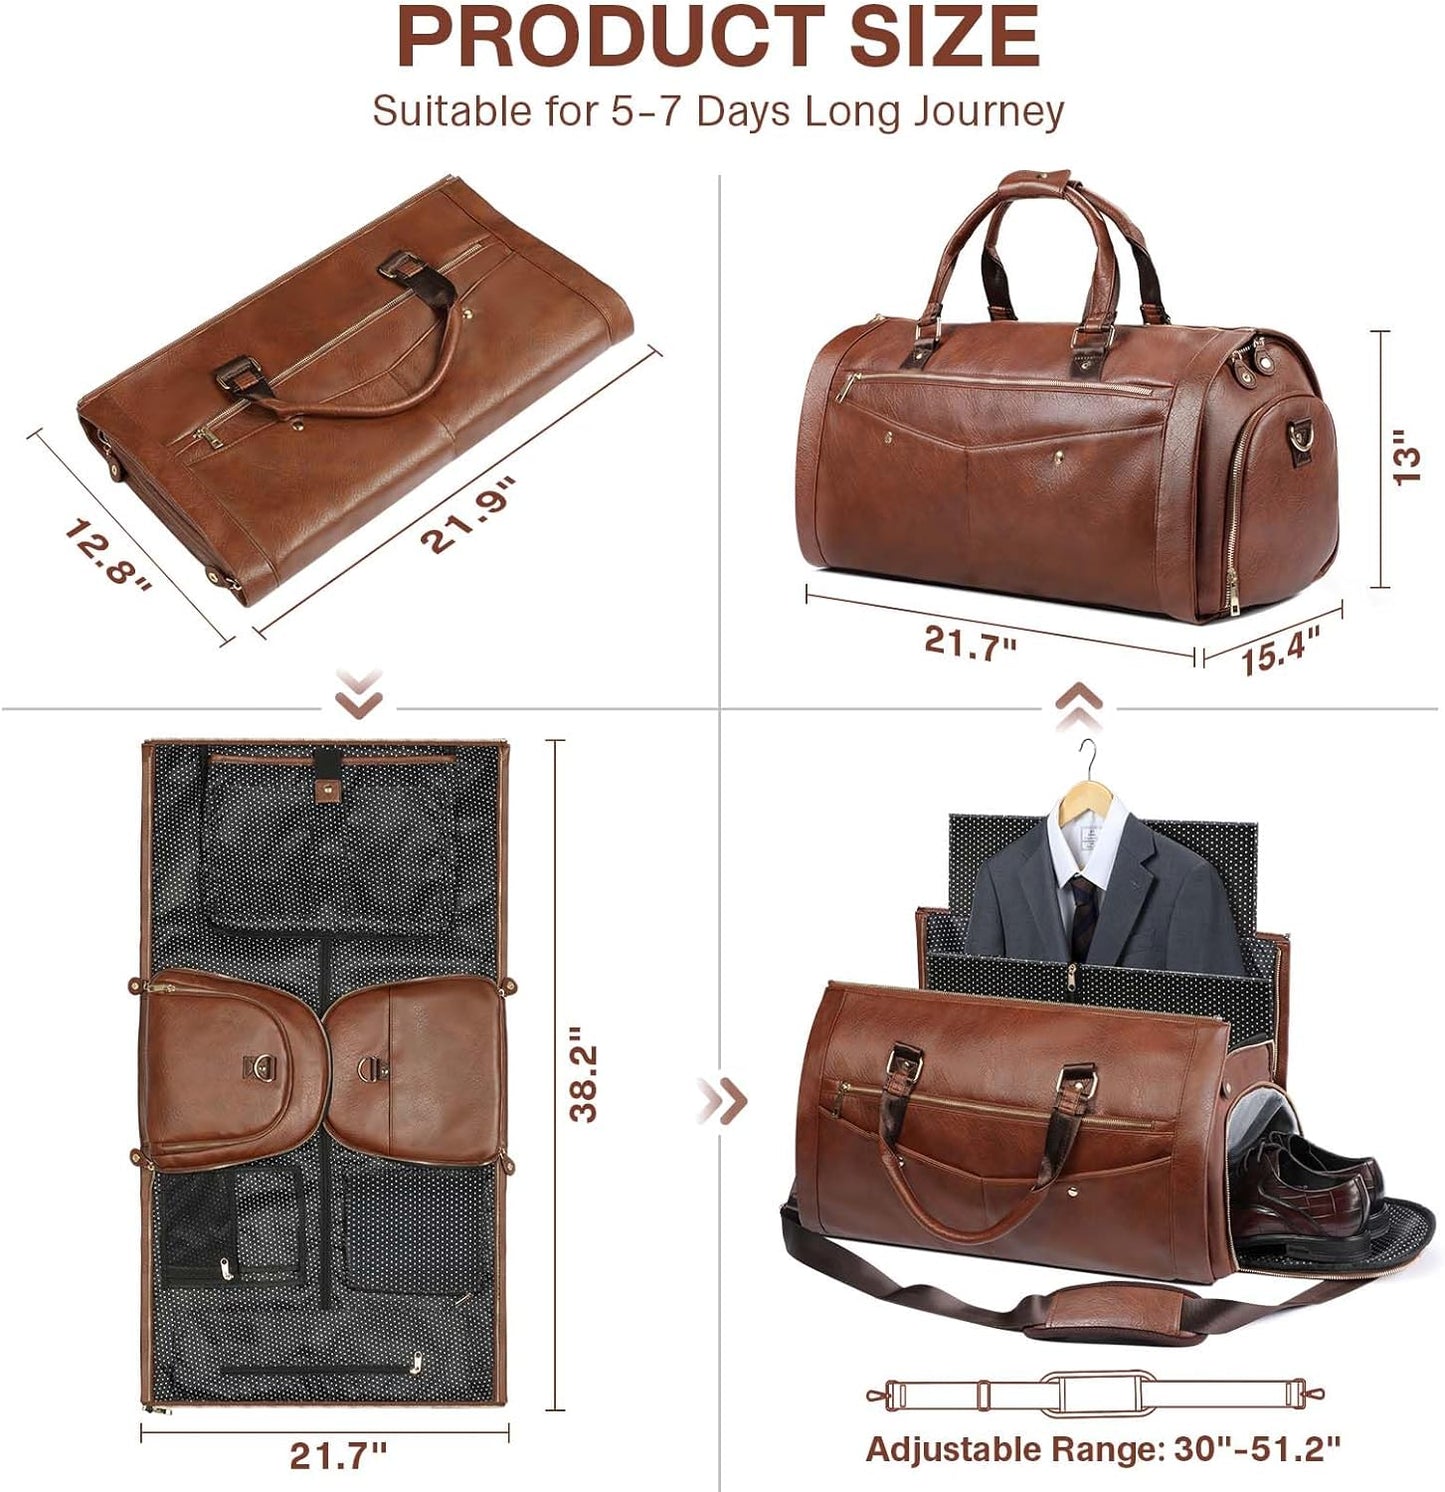 Garment Duffle Bags for Travel, Carry on Convertible Duffle Garment Bag for Men Women - 3 in 1 Hanging Suitcase Suit Business Travel Bag